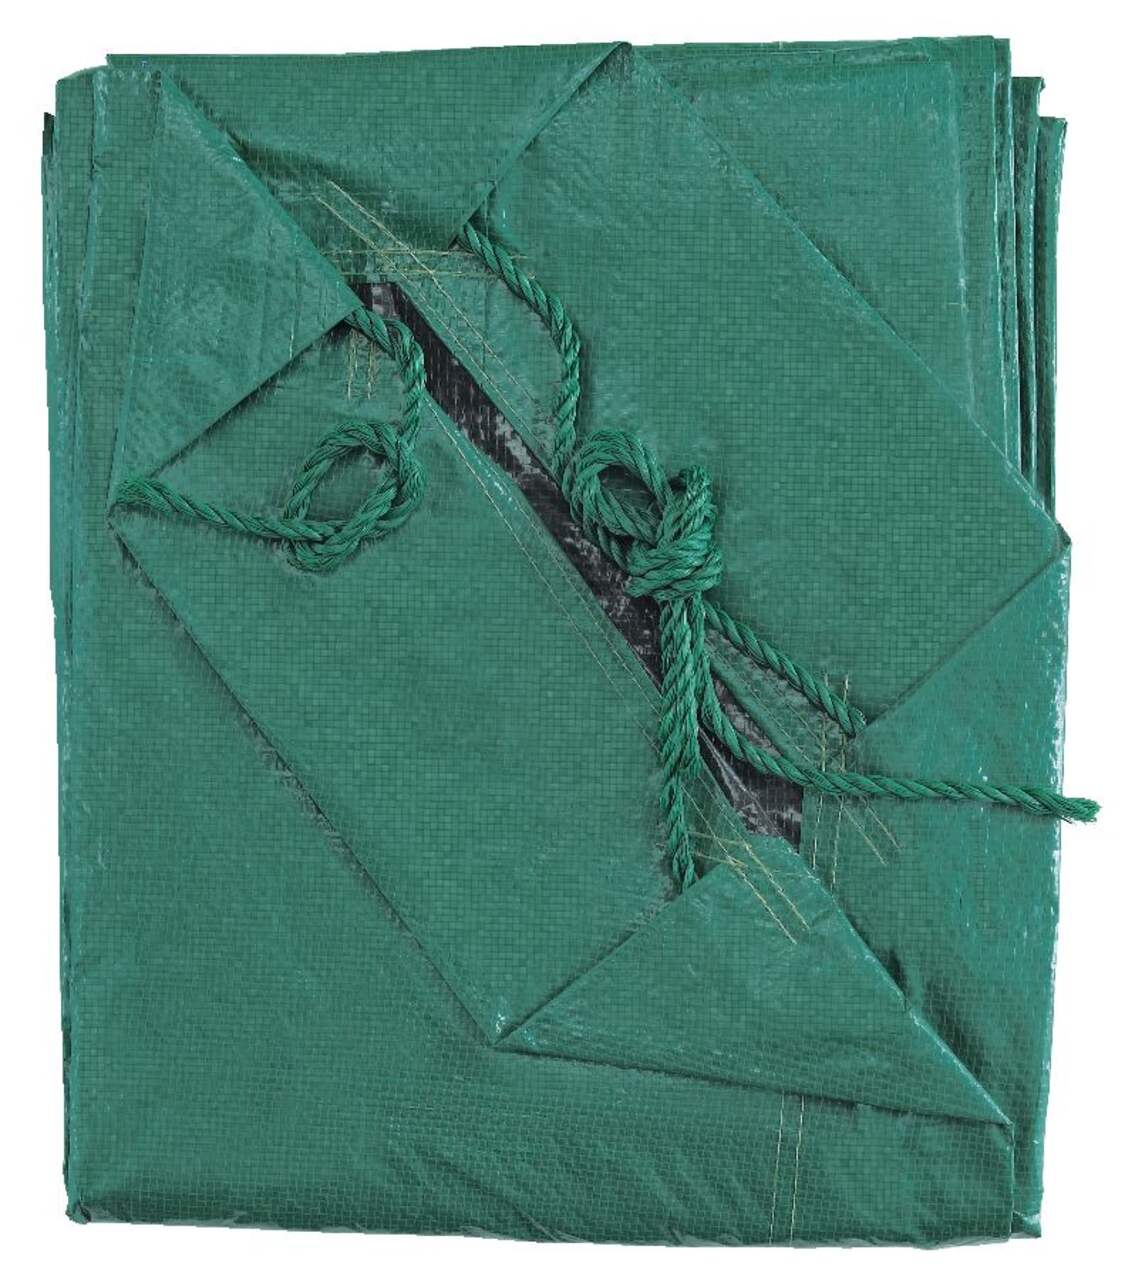 https://media-www.canadiantire.ca/product/automotive/automotive-outdoor-adventure/tarps-cords/0405017/certified-green-tarp-with-strap-aaa55c7a-7e4c-46e6-babe-16bb17eec3e9-jpgrendition.jpg?imdensity=1&imwidth=640&impolicy=mZoom